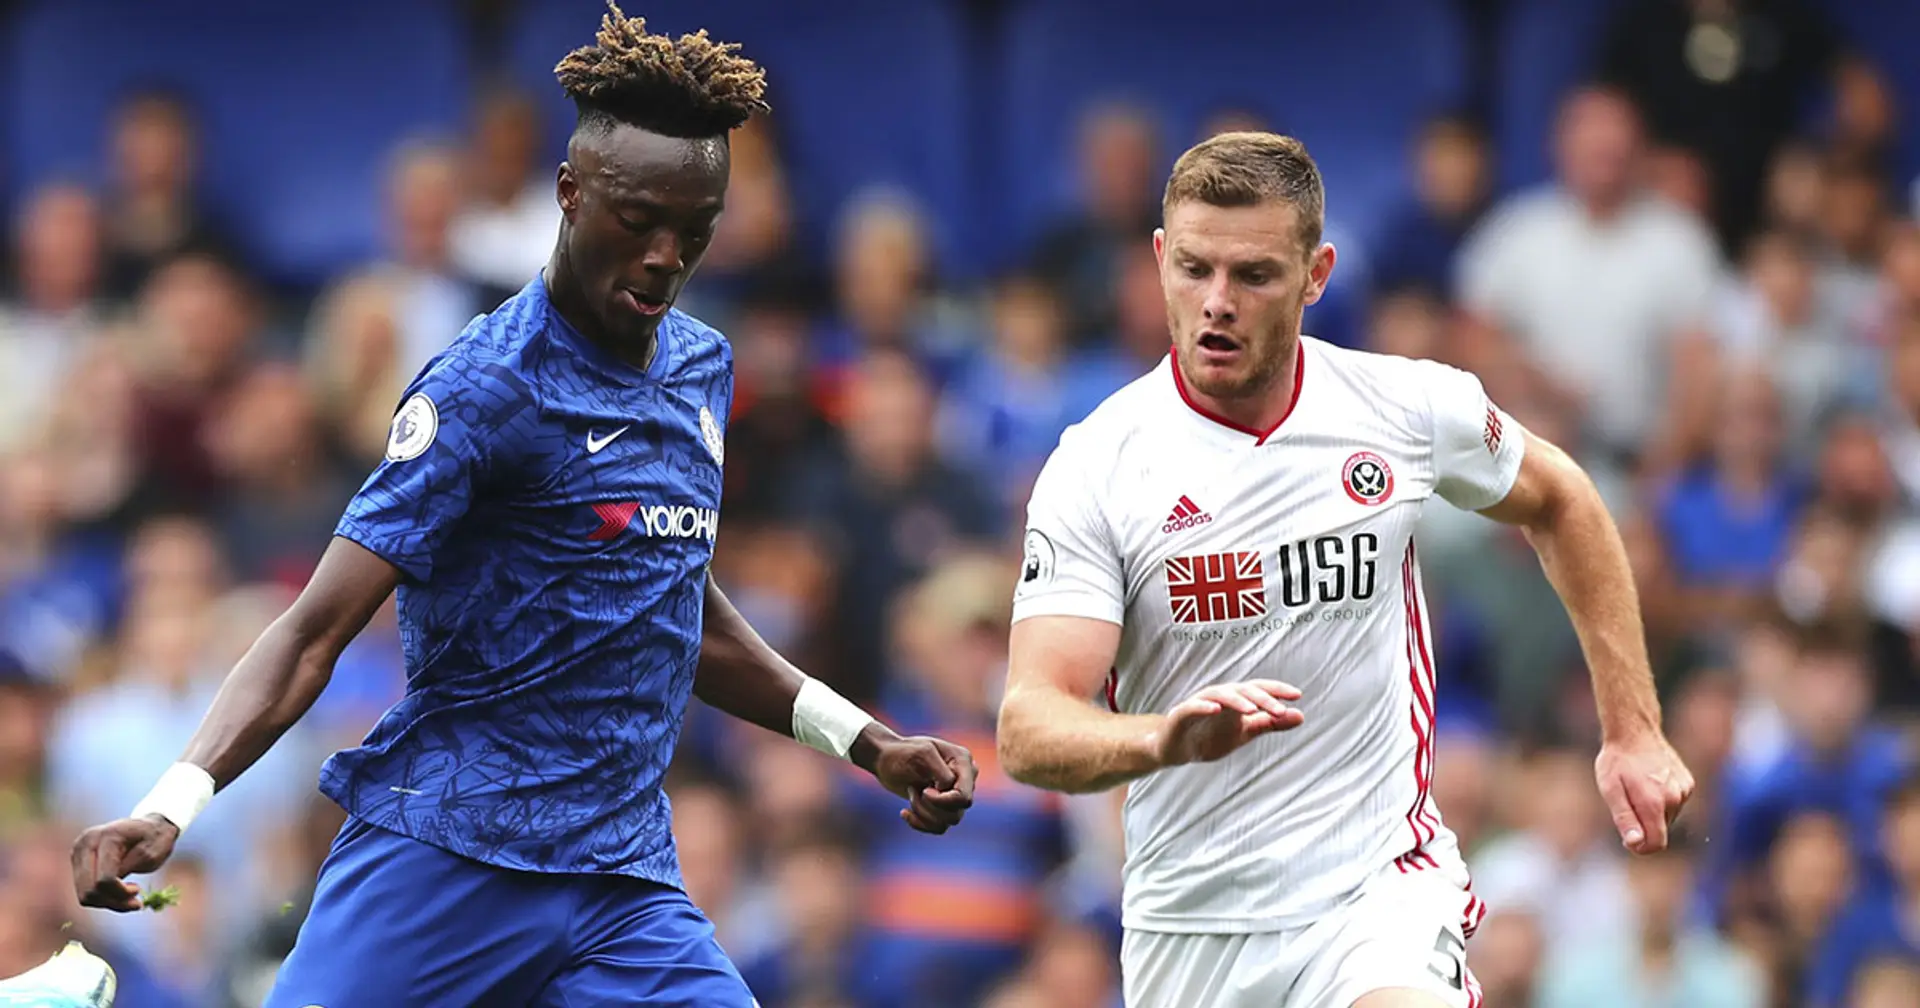 Sheffield vs Chelsea: Team news, stats to know, score predictions, probable XIs - preview